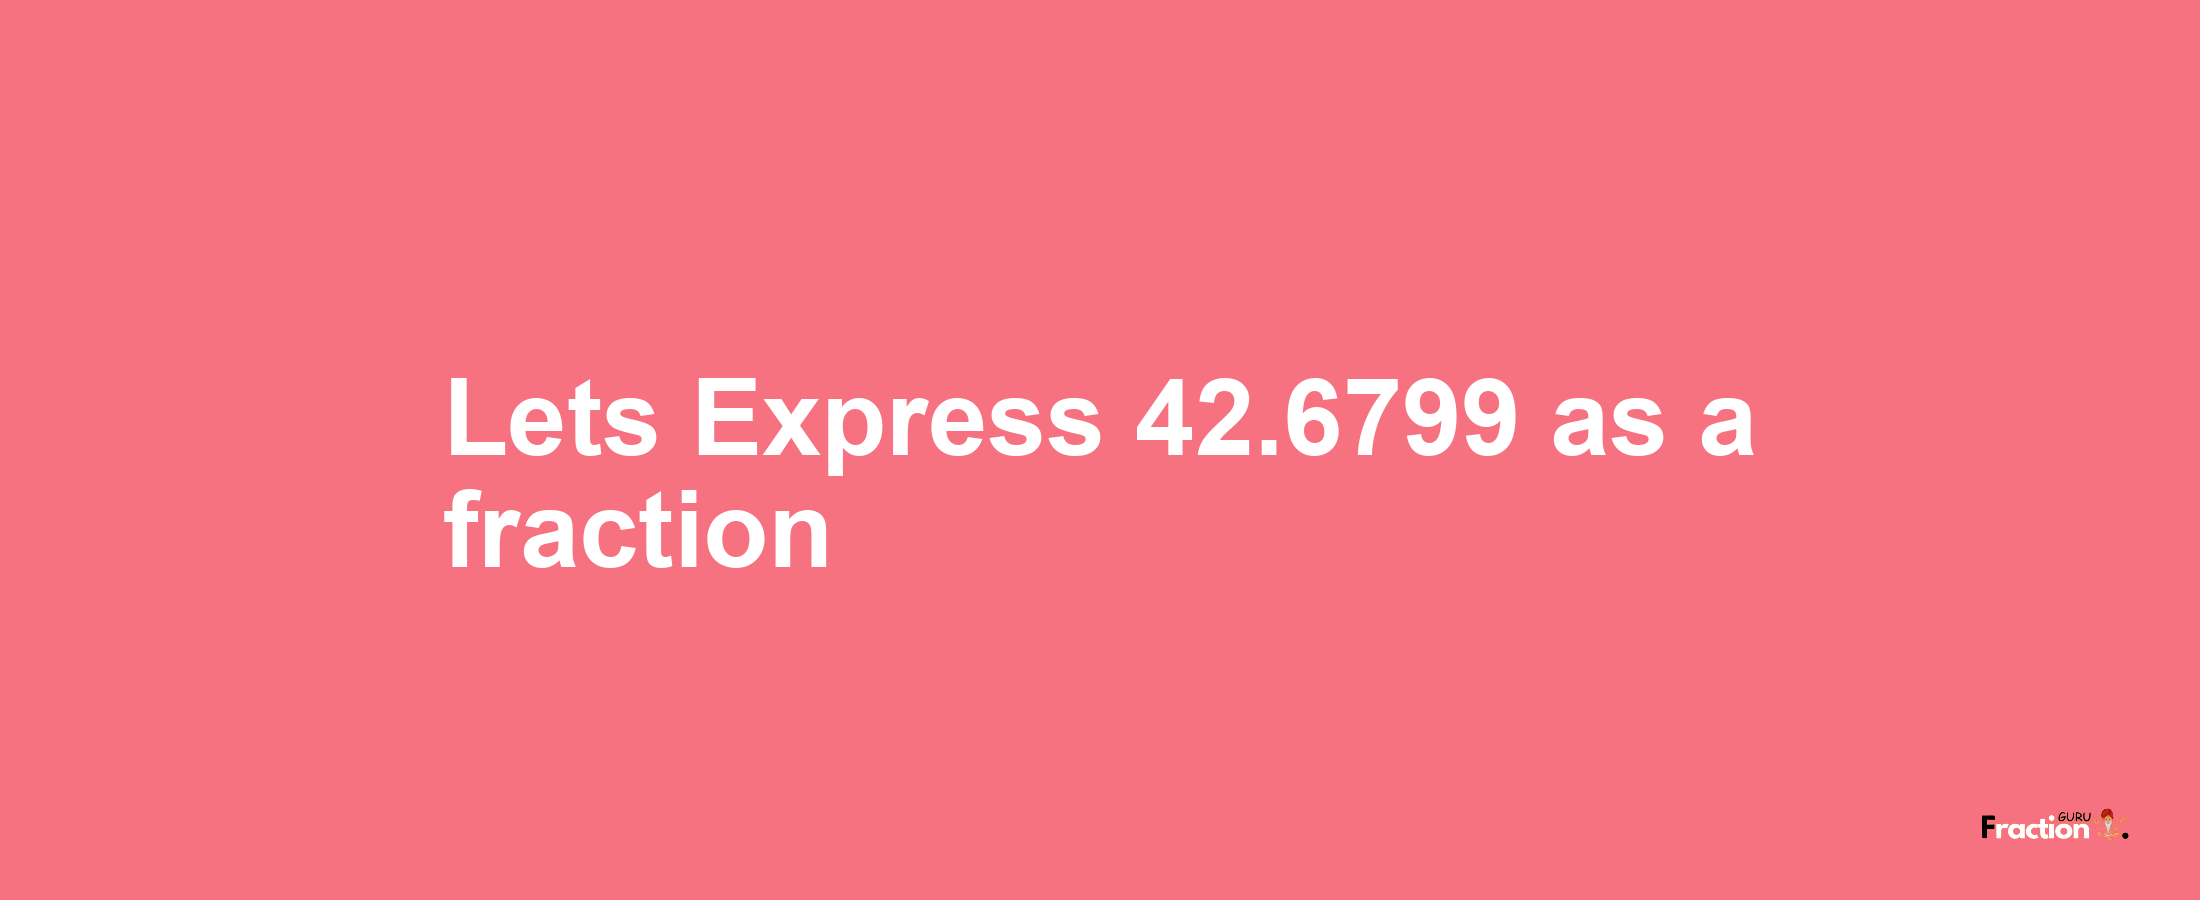 Lets Express 42.6799 as afraction